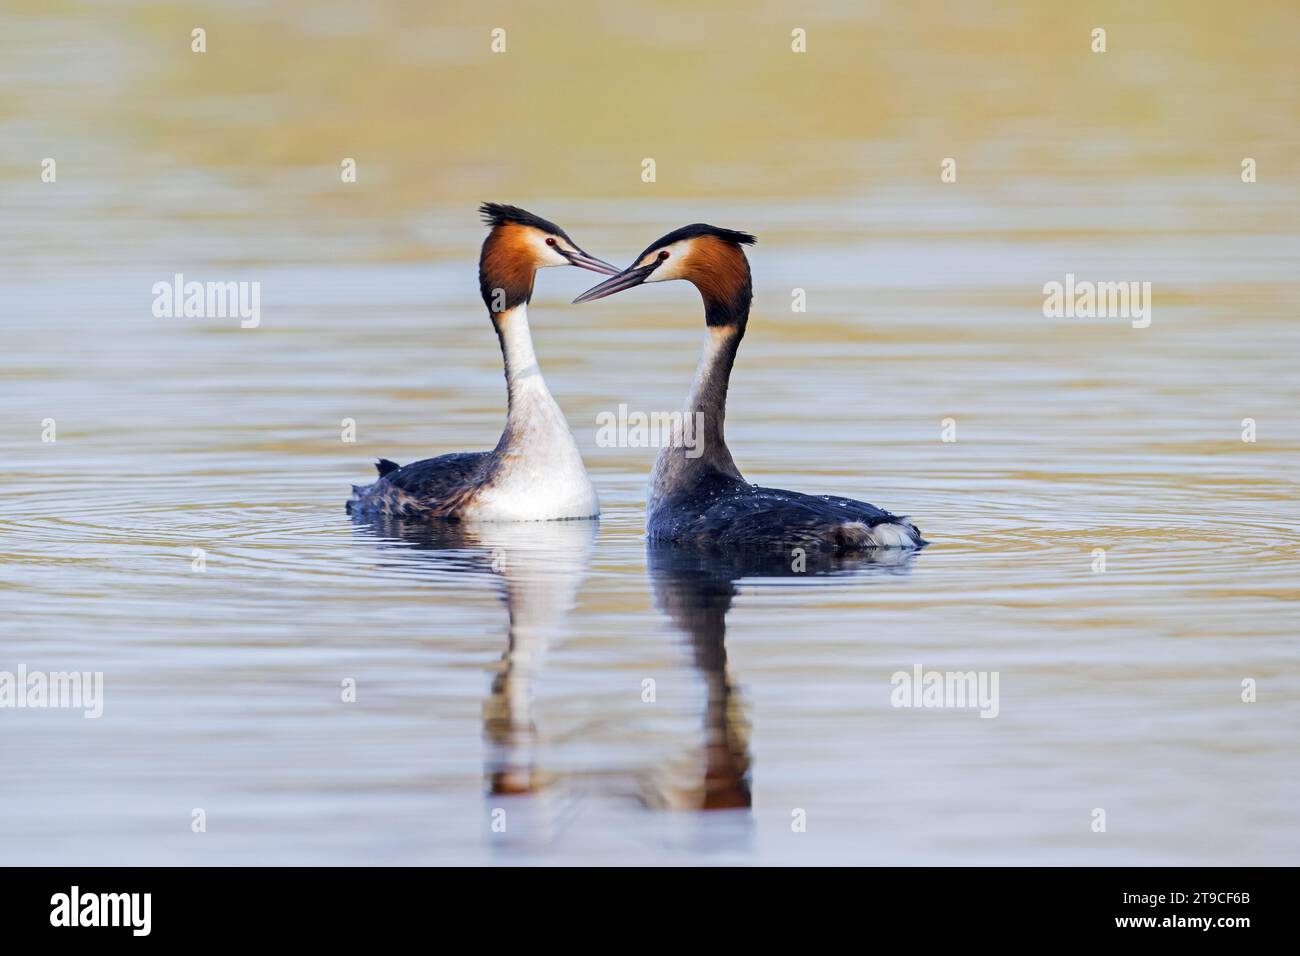 Great crested grebe (Podiceps cristatus) pair in breeding plumage displaying by shaking heads during mating ritual in lake / pond in early spring Stock Photo